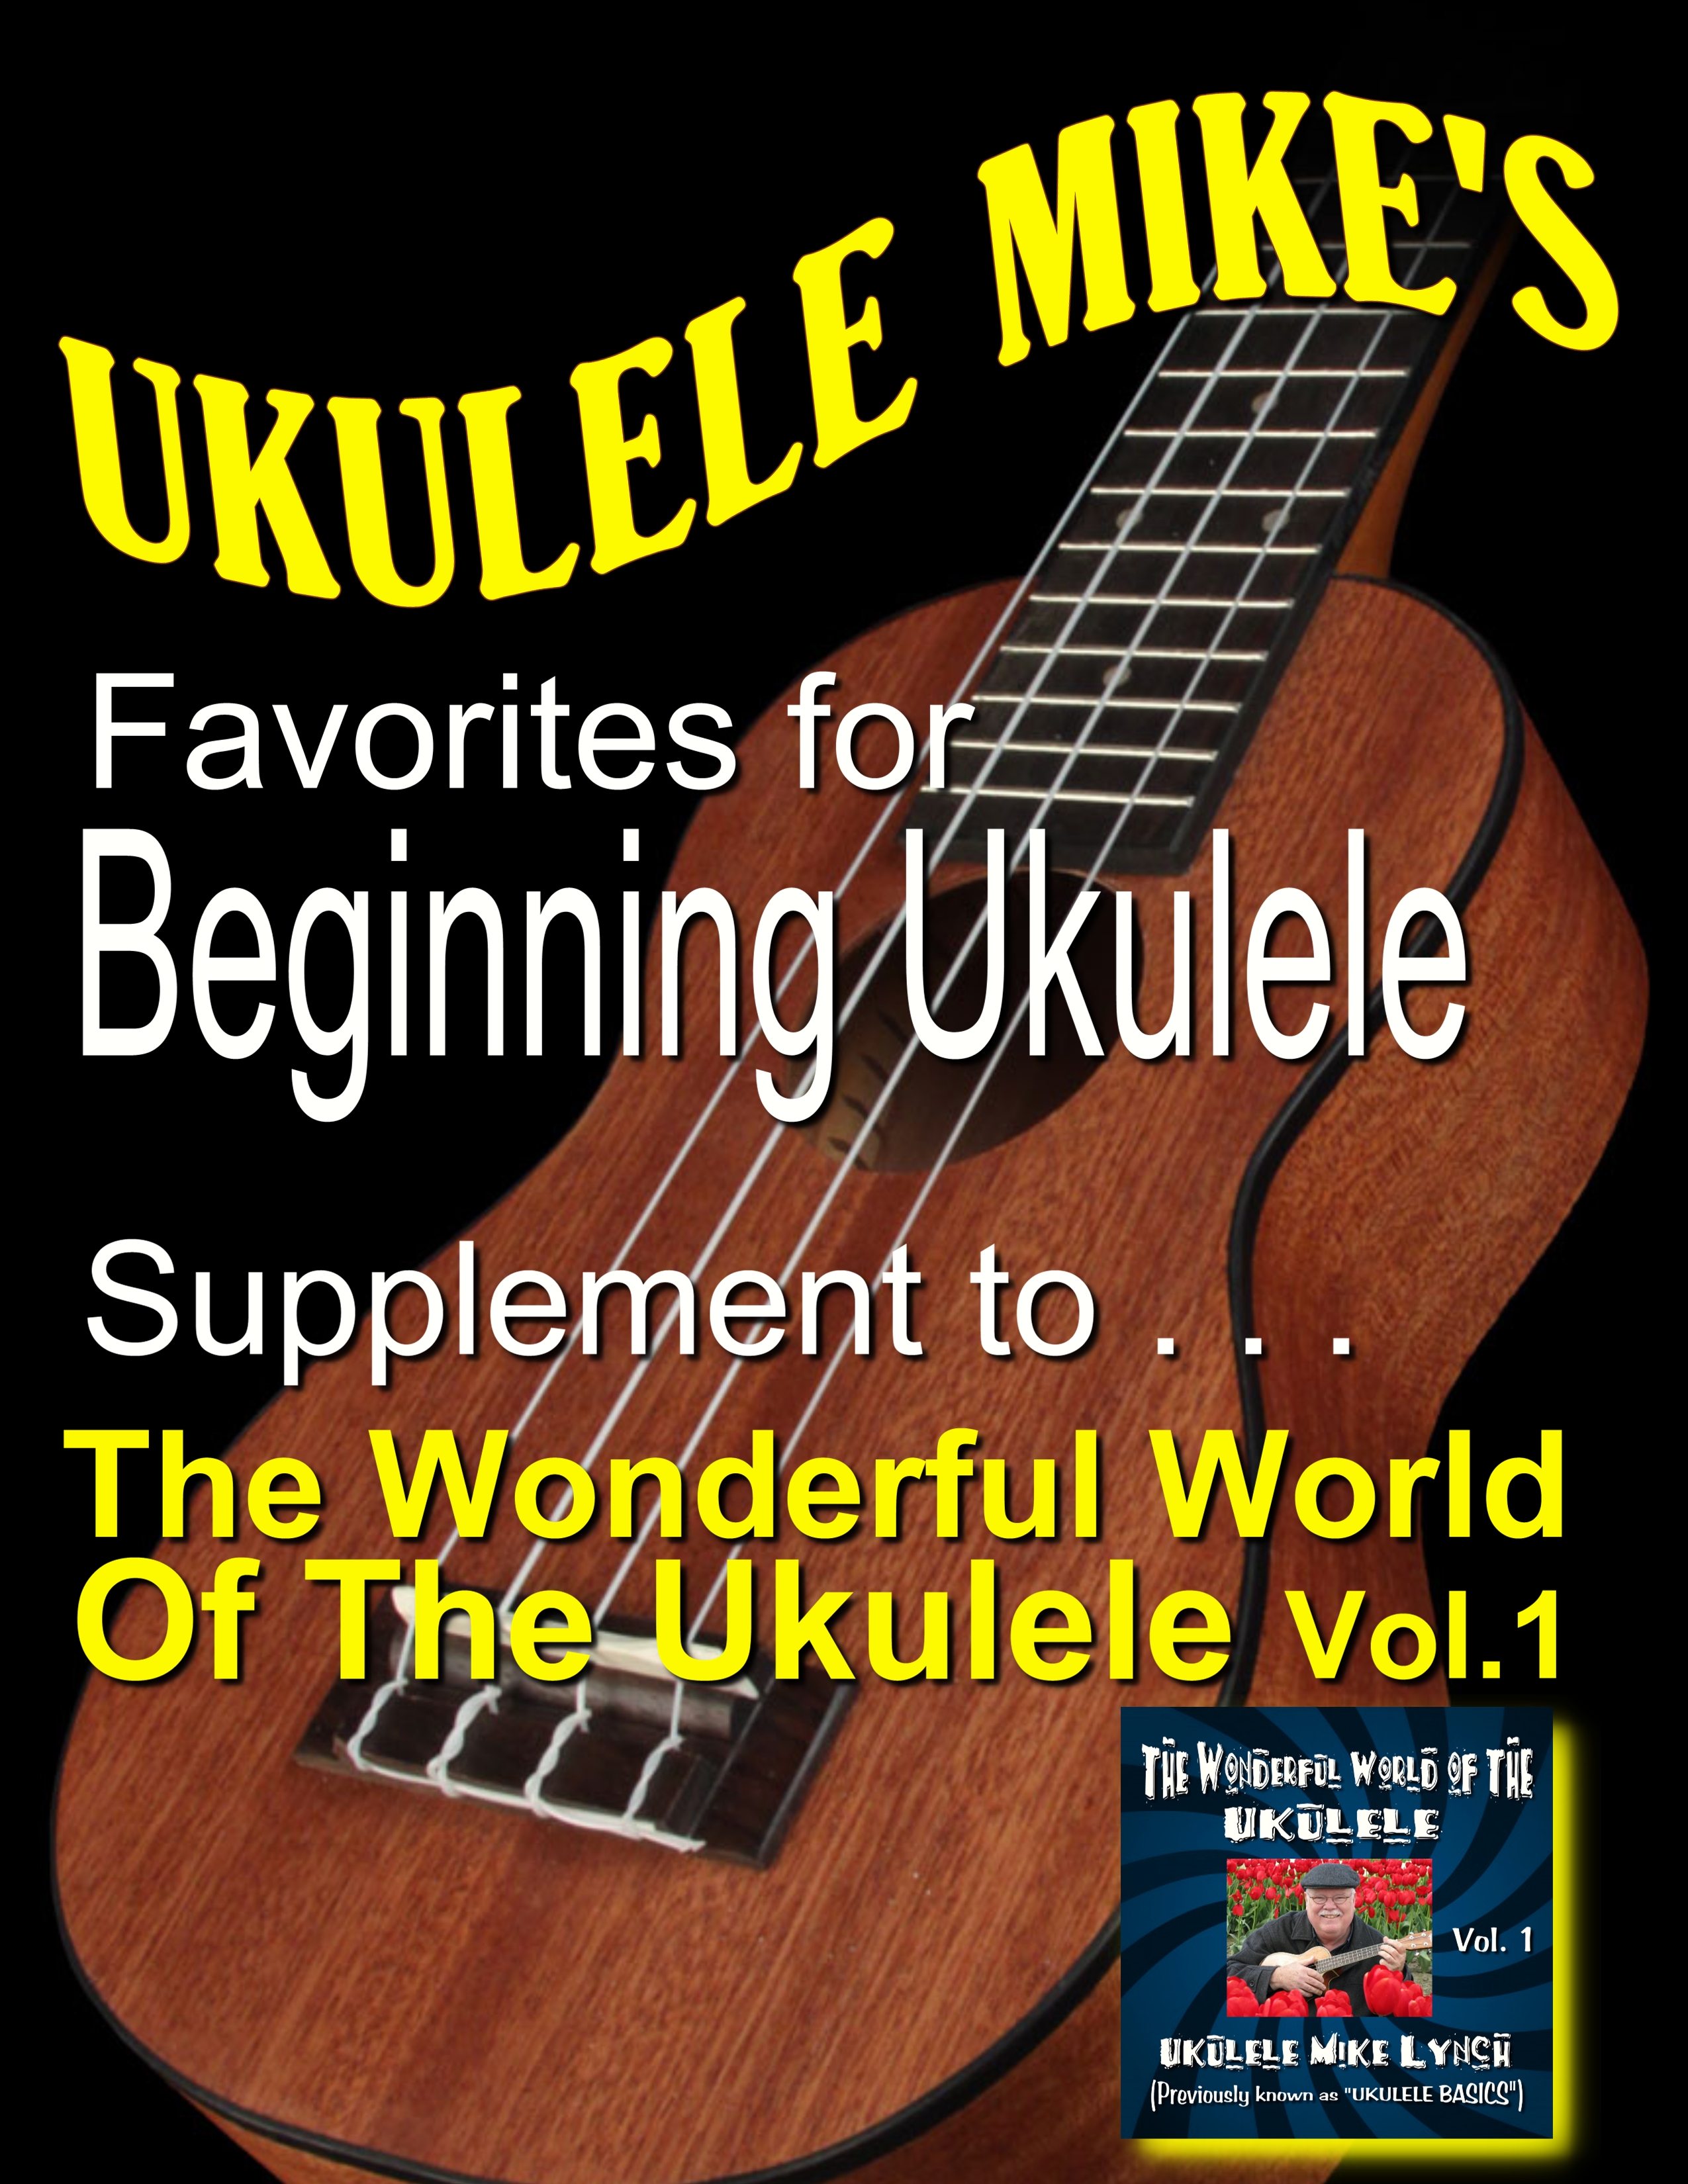 Mikes Favorites With Uke In The Background Ukulele Mike Lynch